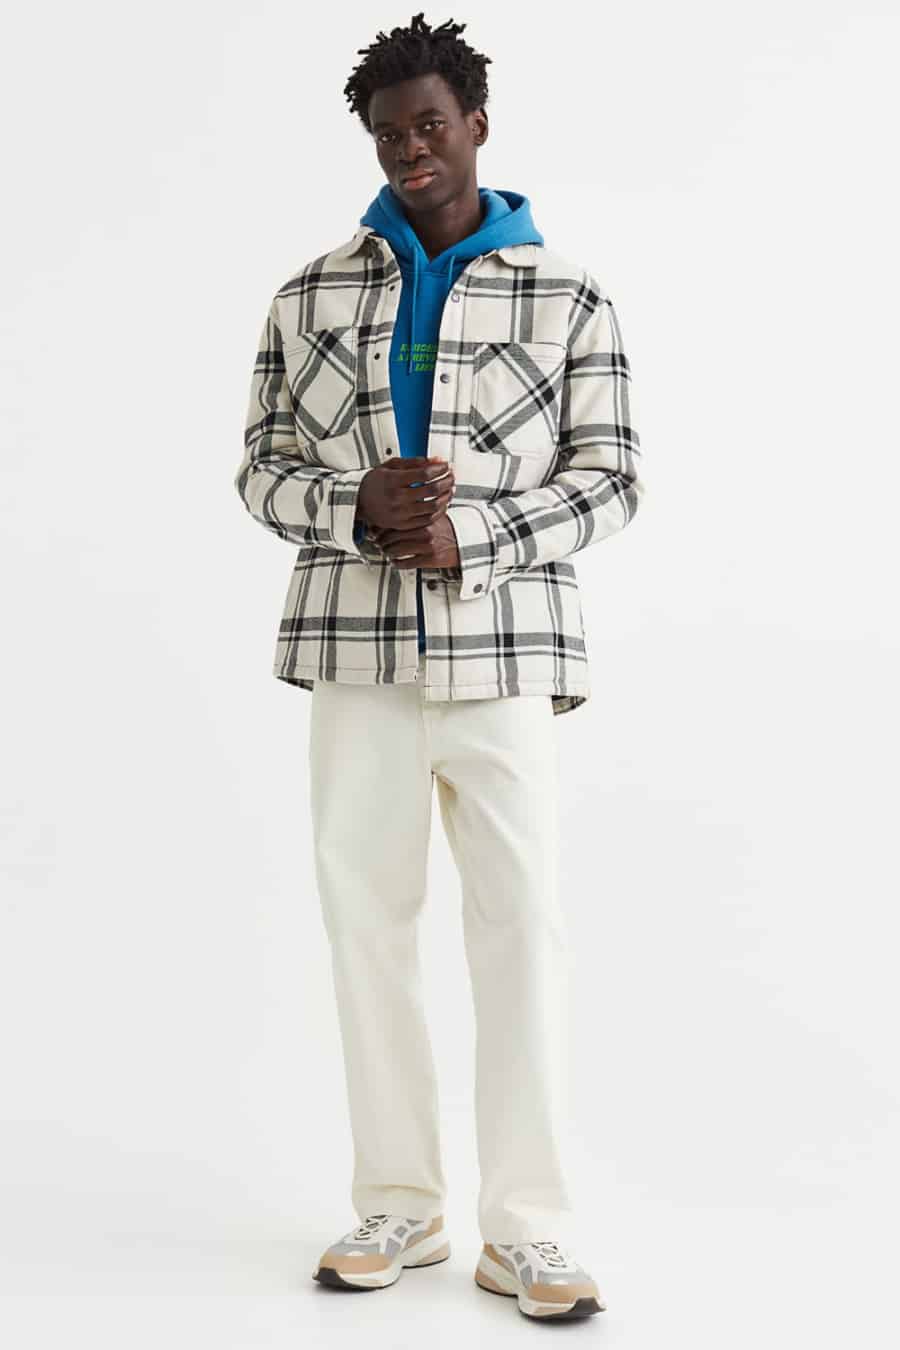 Men's white pants, bold blue hoodie, white and black checked flannel overshirt and white sneakers outfit